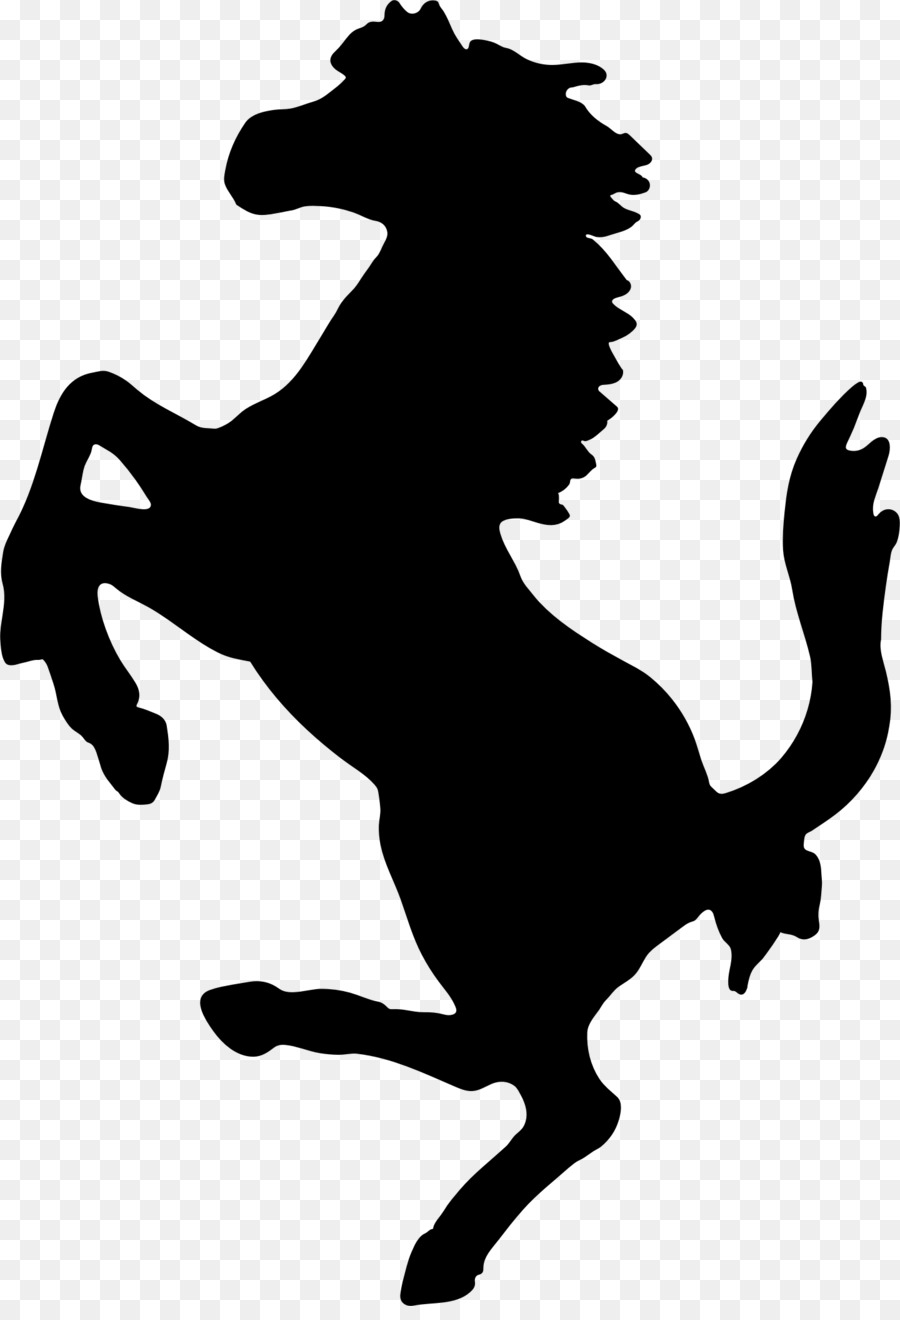 Horse Silhouette Clip art - animal silhouettes png download - 1440*2090 - Free Transparent Horse png Download.